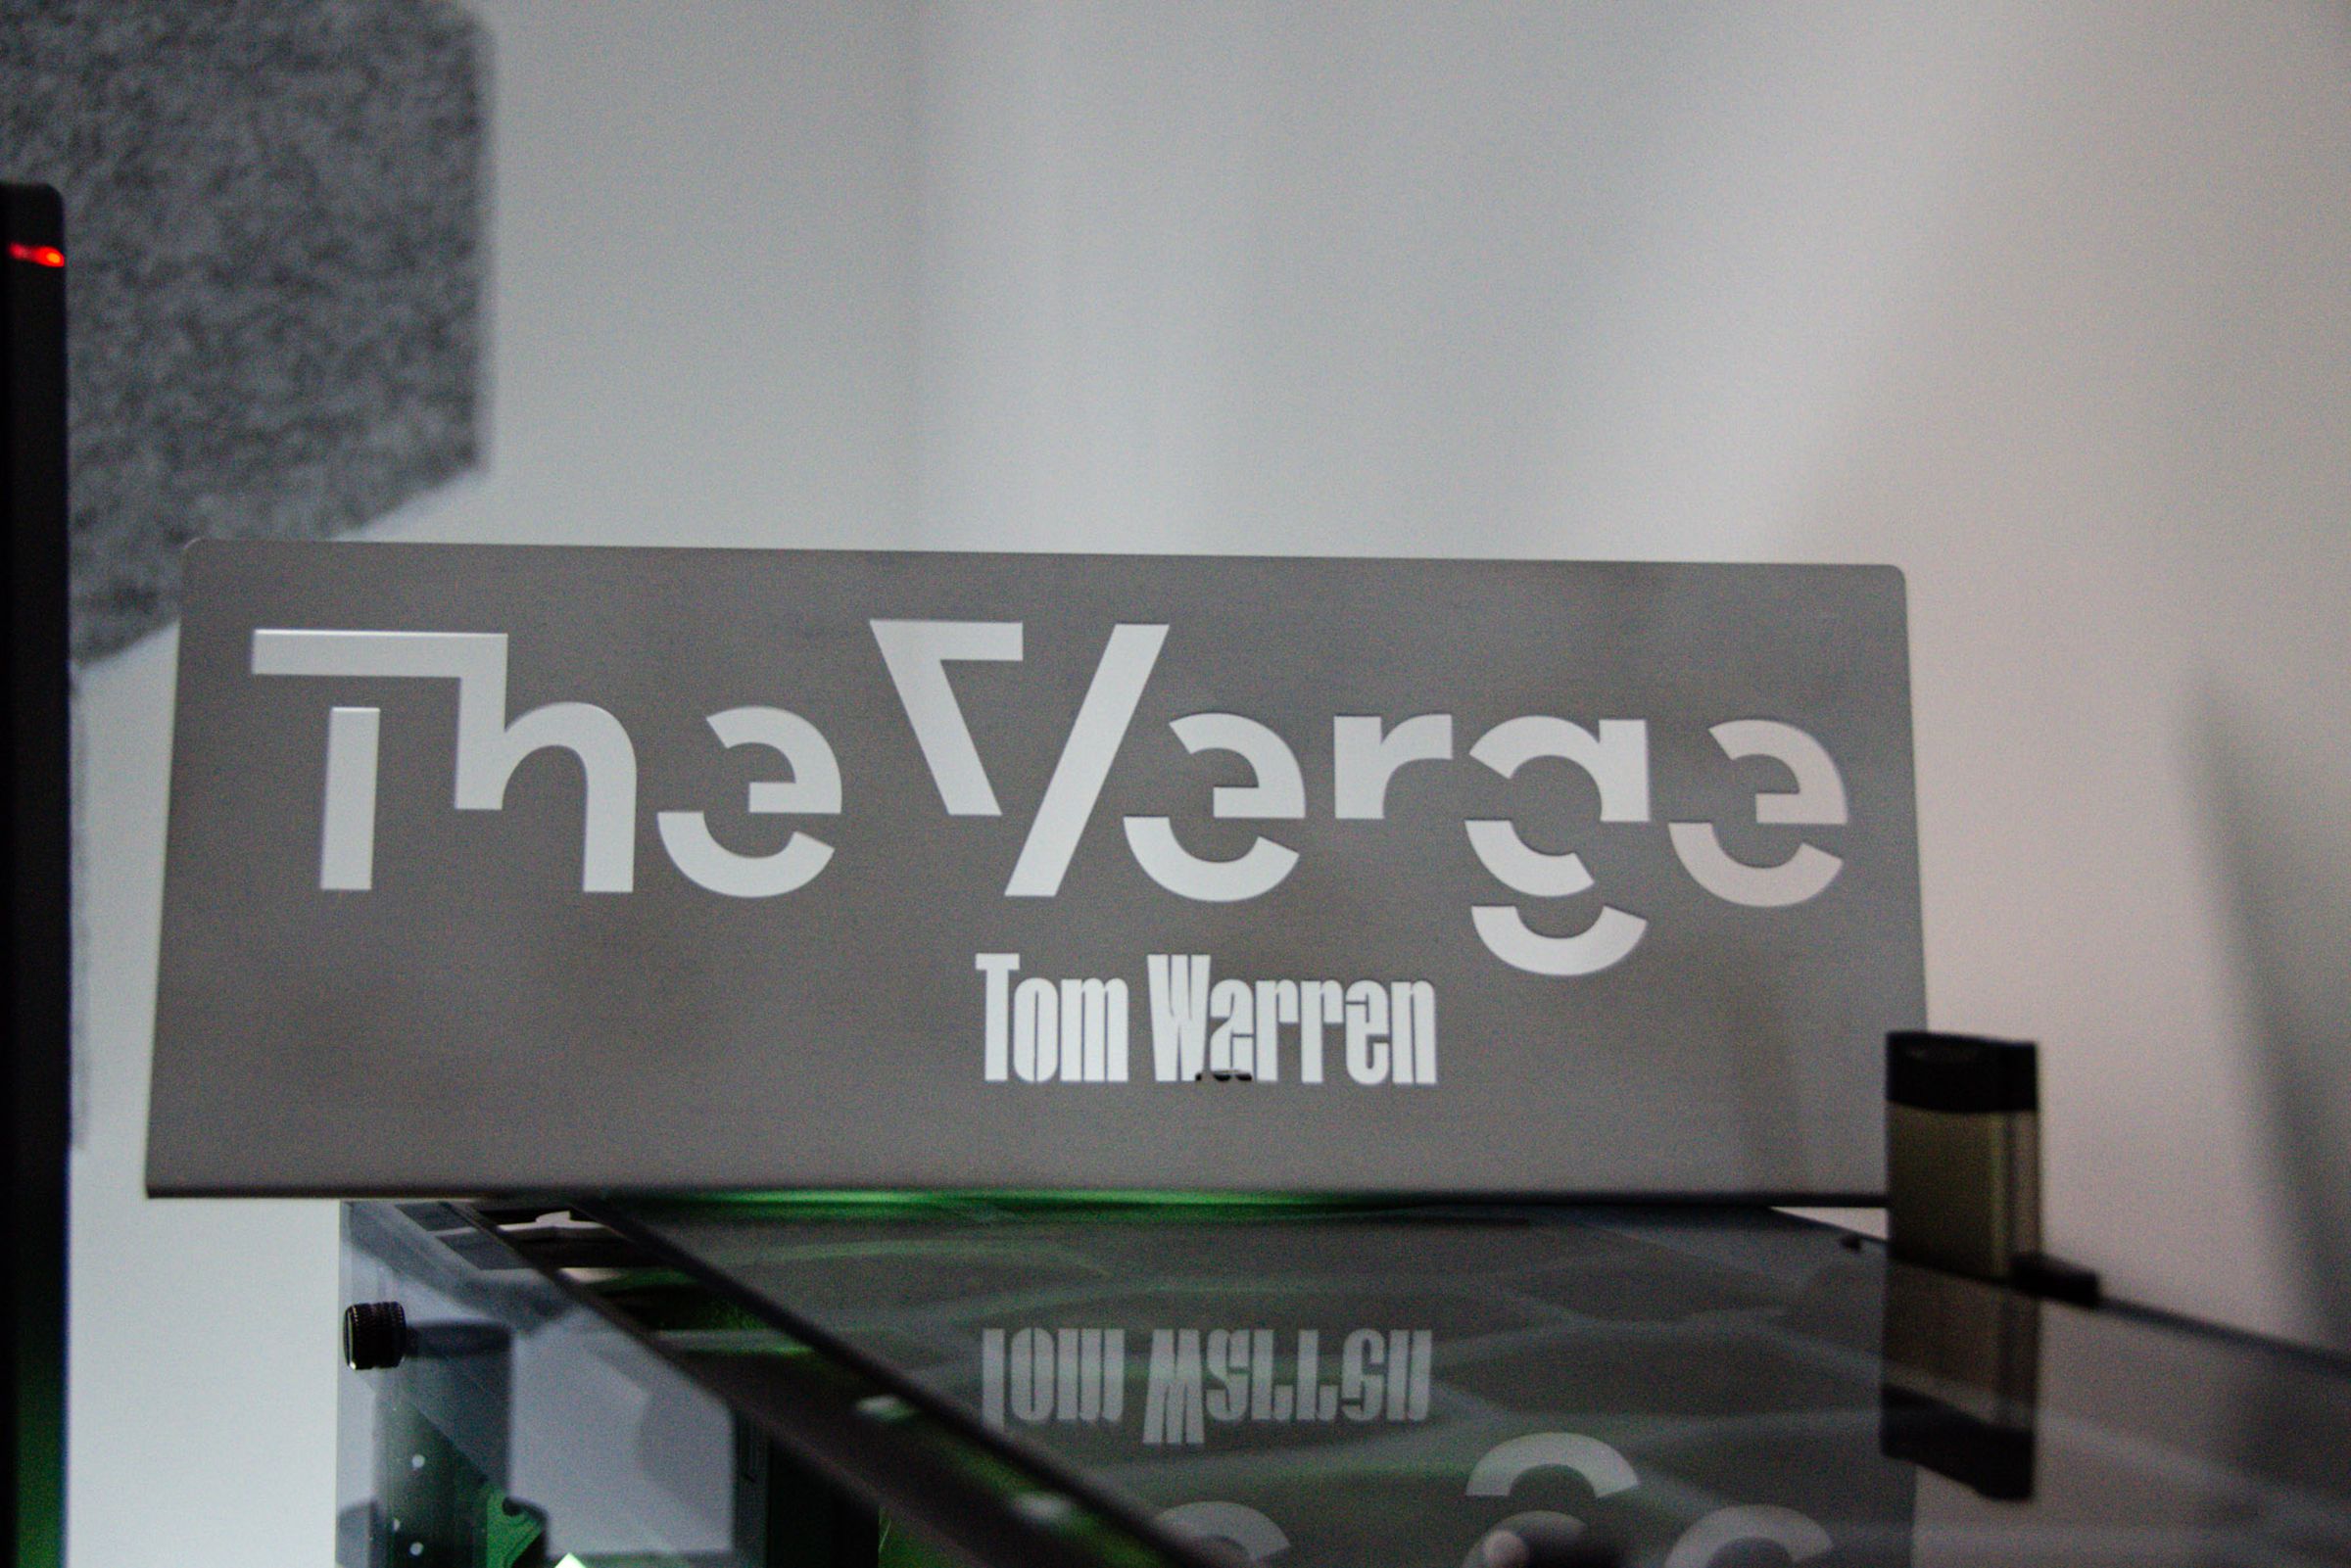 The sign says 'The Verge' and below it says 'Tom Warren'.